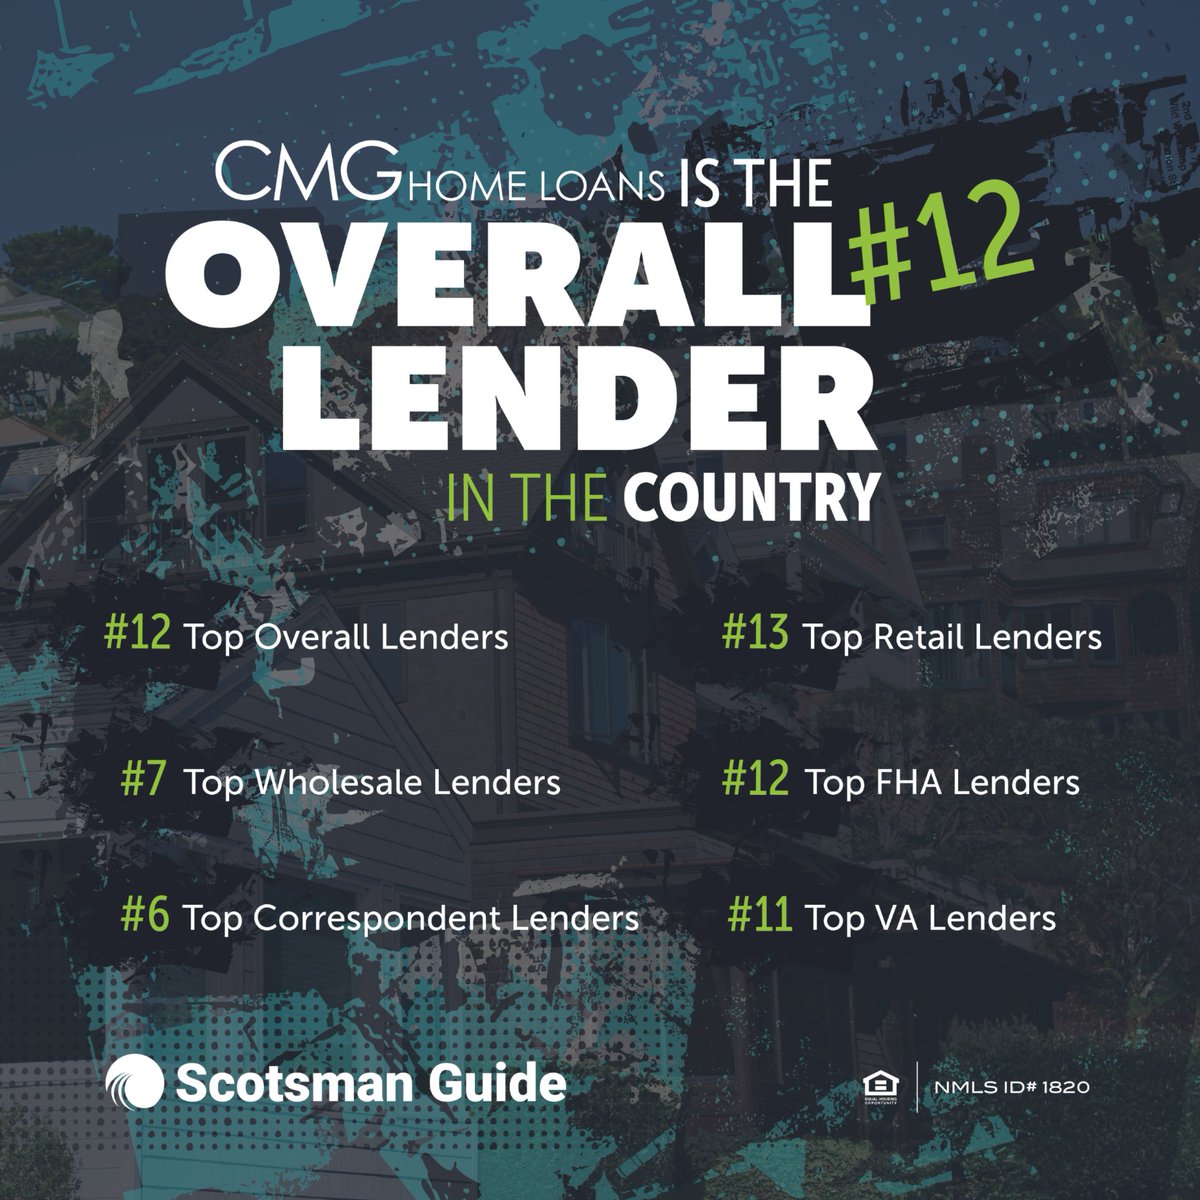 So proud to be recognized along with my peers, and as a company for being a top 12 overall lender in our country! 🏅 🏆 Here is to continuing this excellence and improving our score in this upcoming year.

#toplender #MortgageBroker #MortgageLender #CMGHomeLoans #CMGFamily #CMG